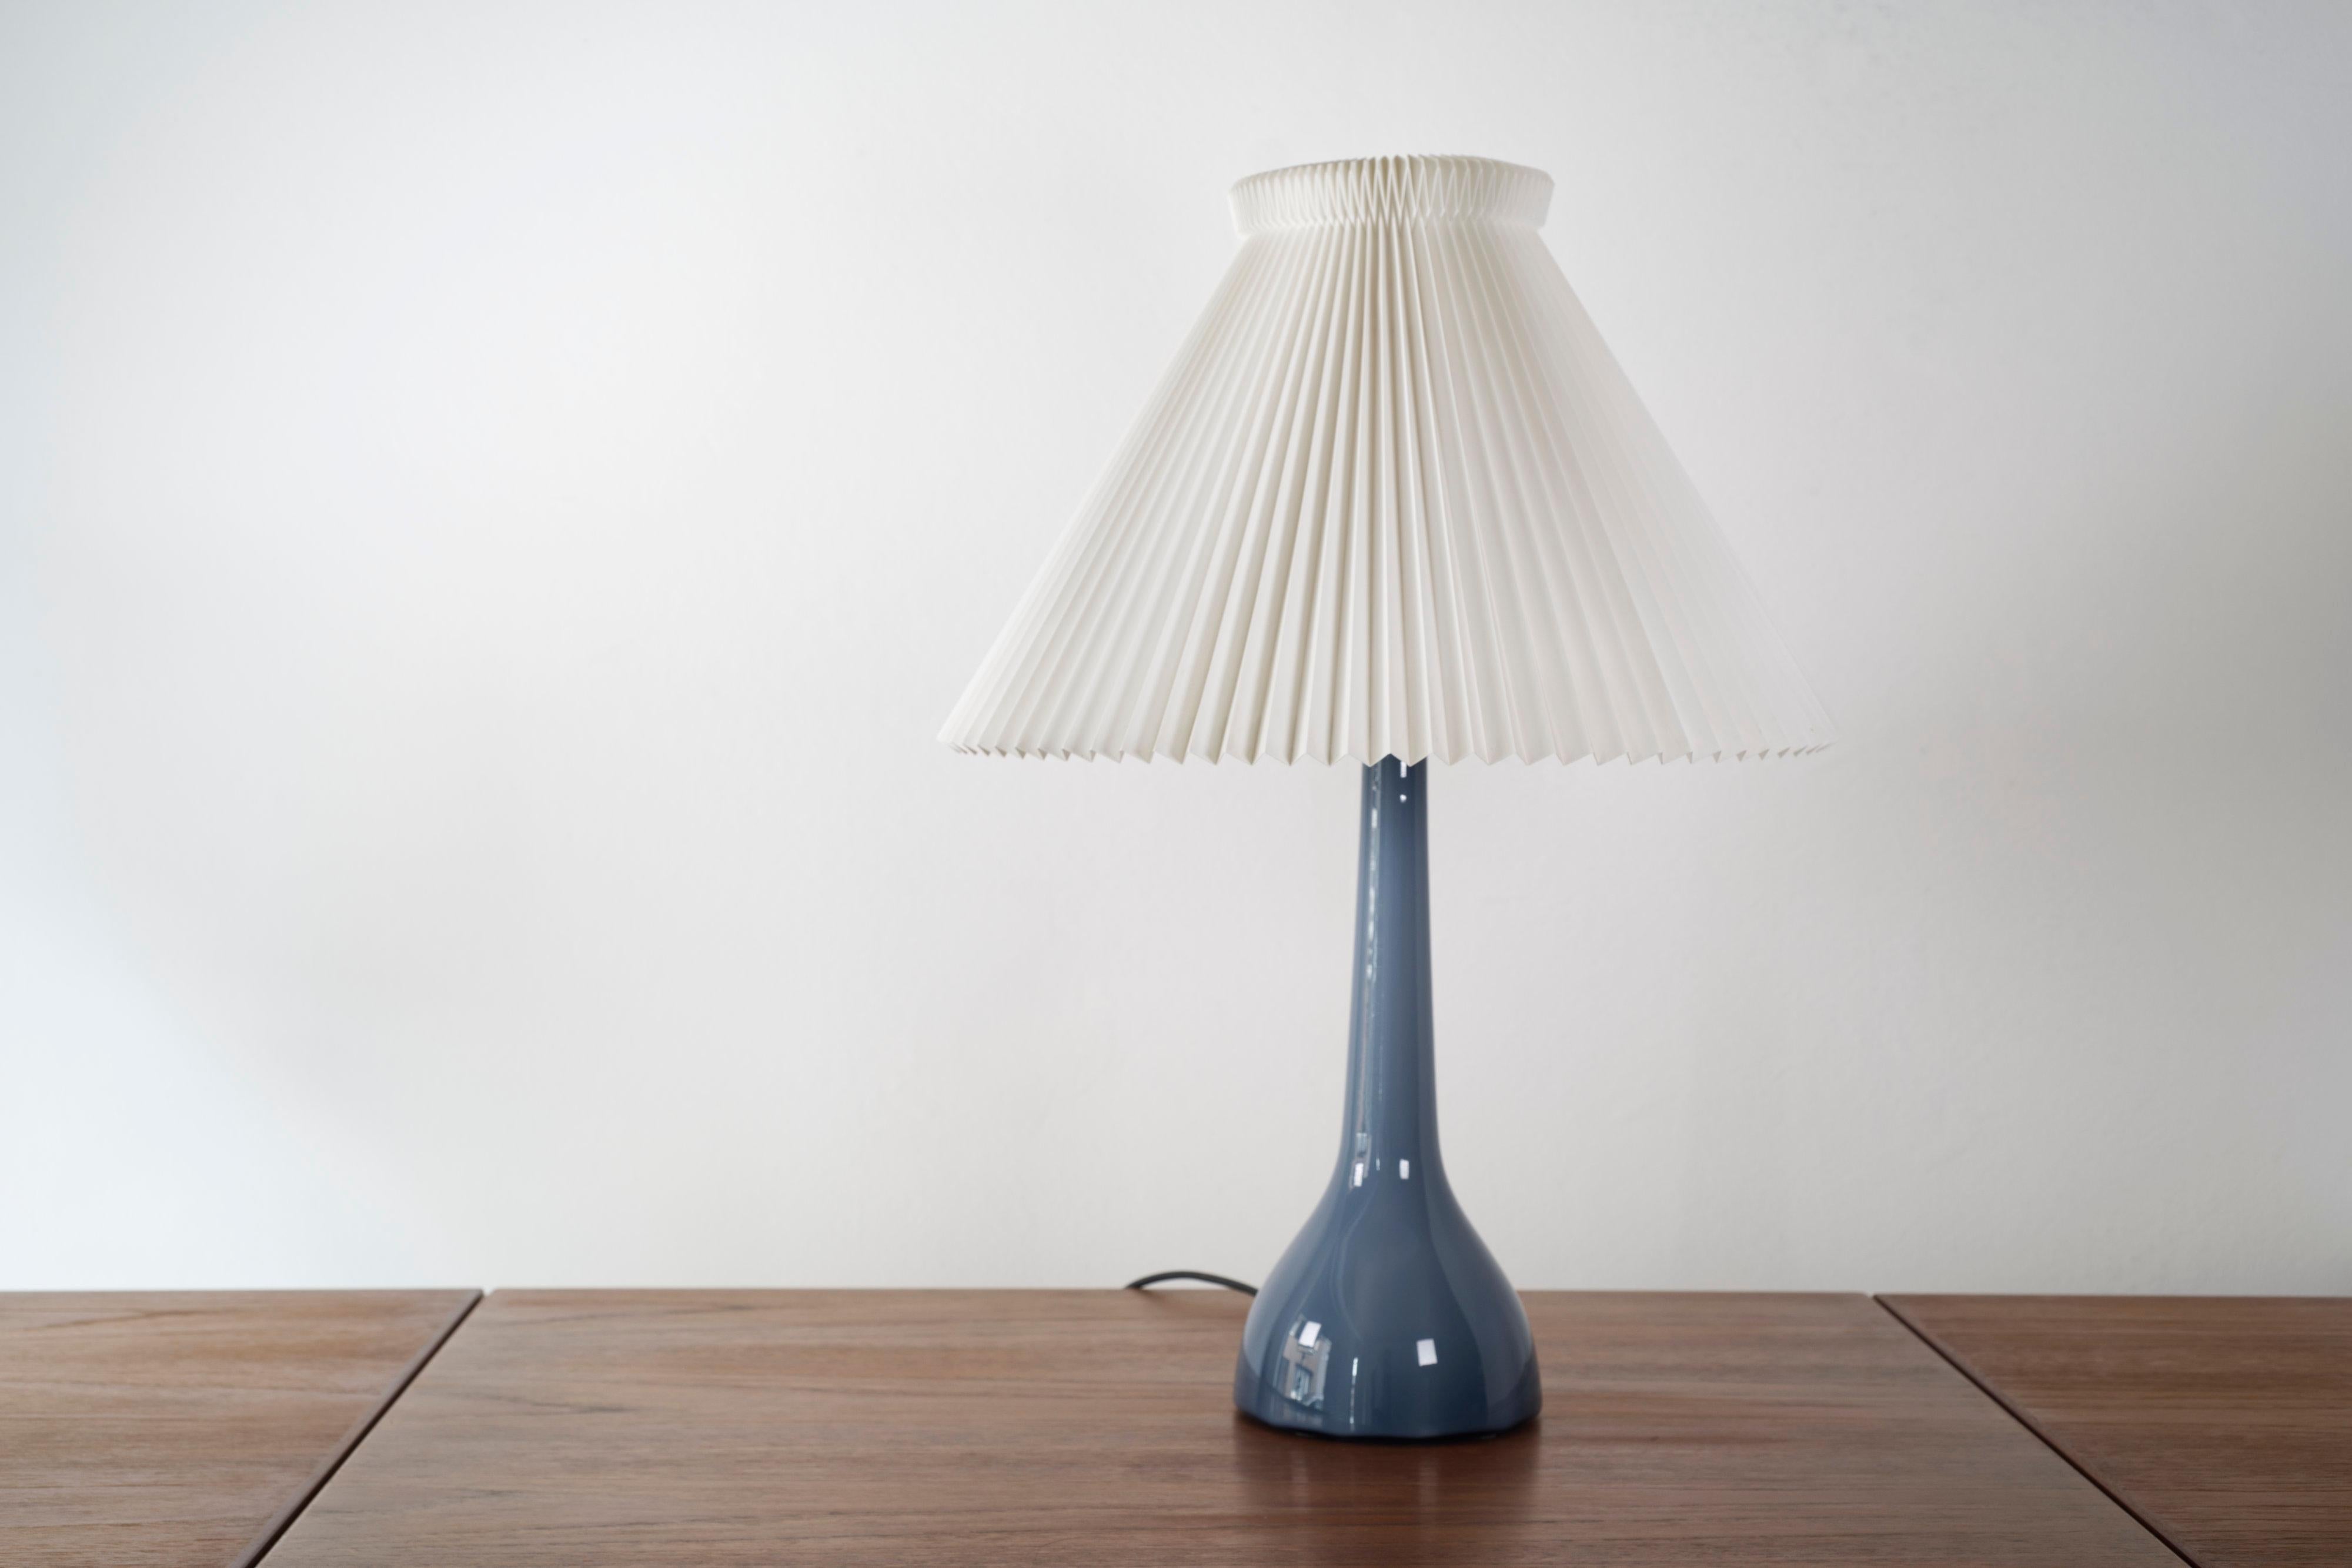 A rare blue Danish midcentury table lamp by Esben Klint for Karstrup Holmegaard Fyns Glasværk, 1950s.

Beautiful blue coloured glass with a swirl effect of darker and lighter shades. This model and shape is very uncommon and features very slight